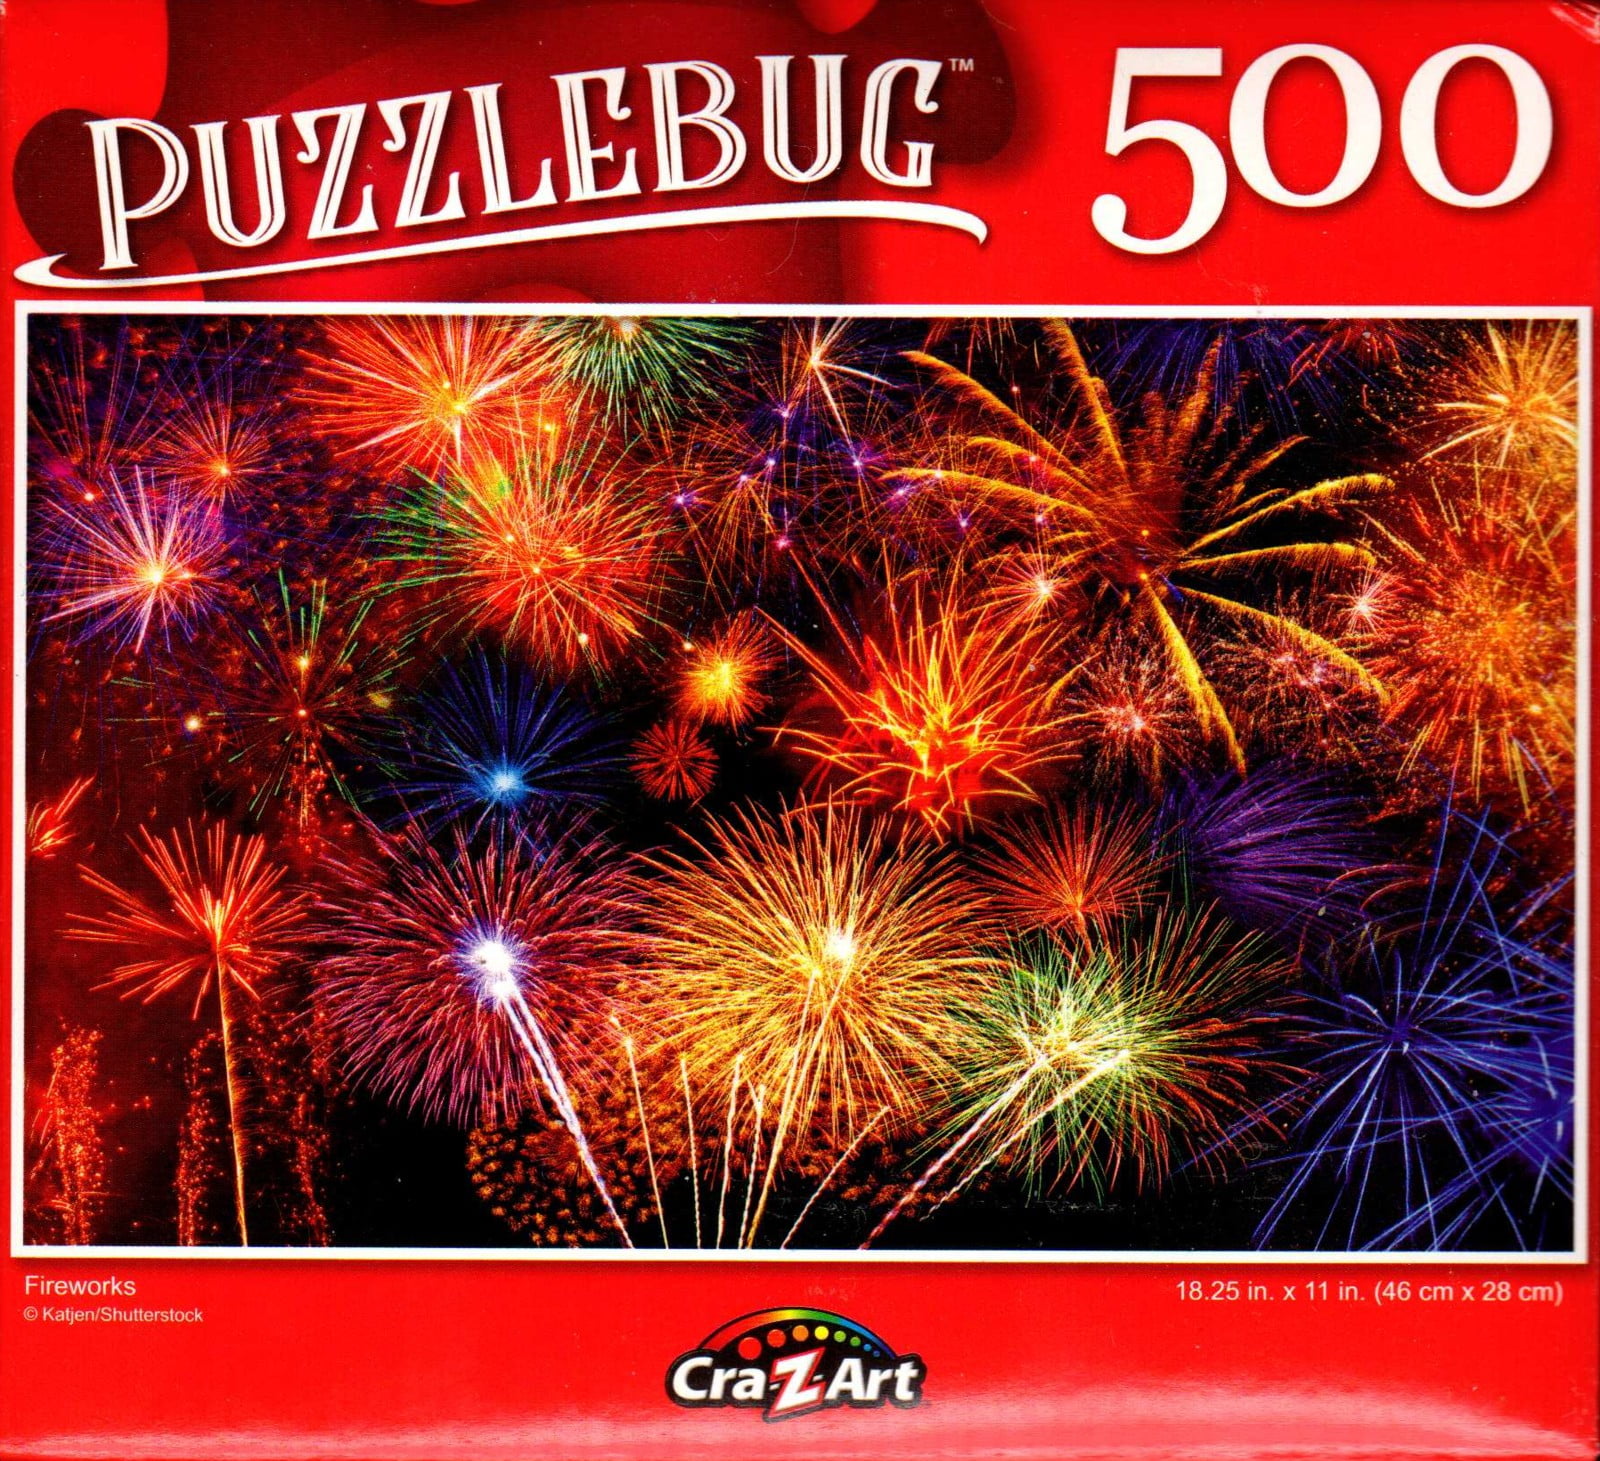 NEW Puzzlebug 500 Piece Jigsaw Puzzle ~ Colorful Sweets 